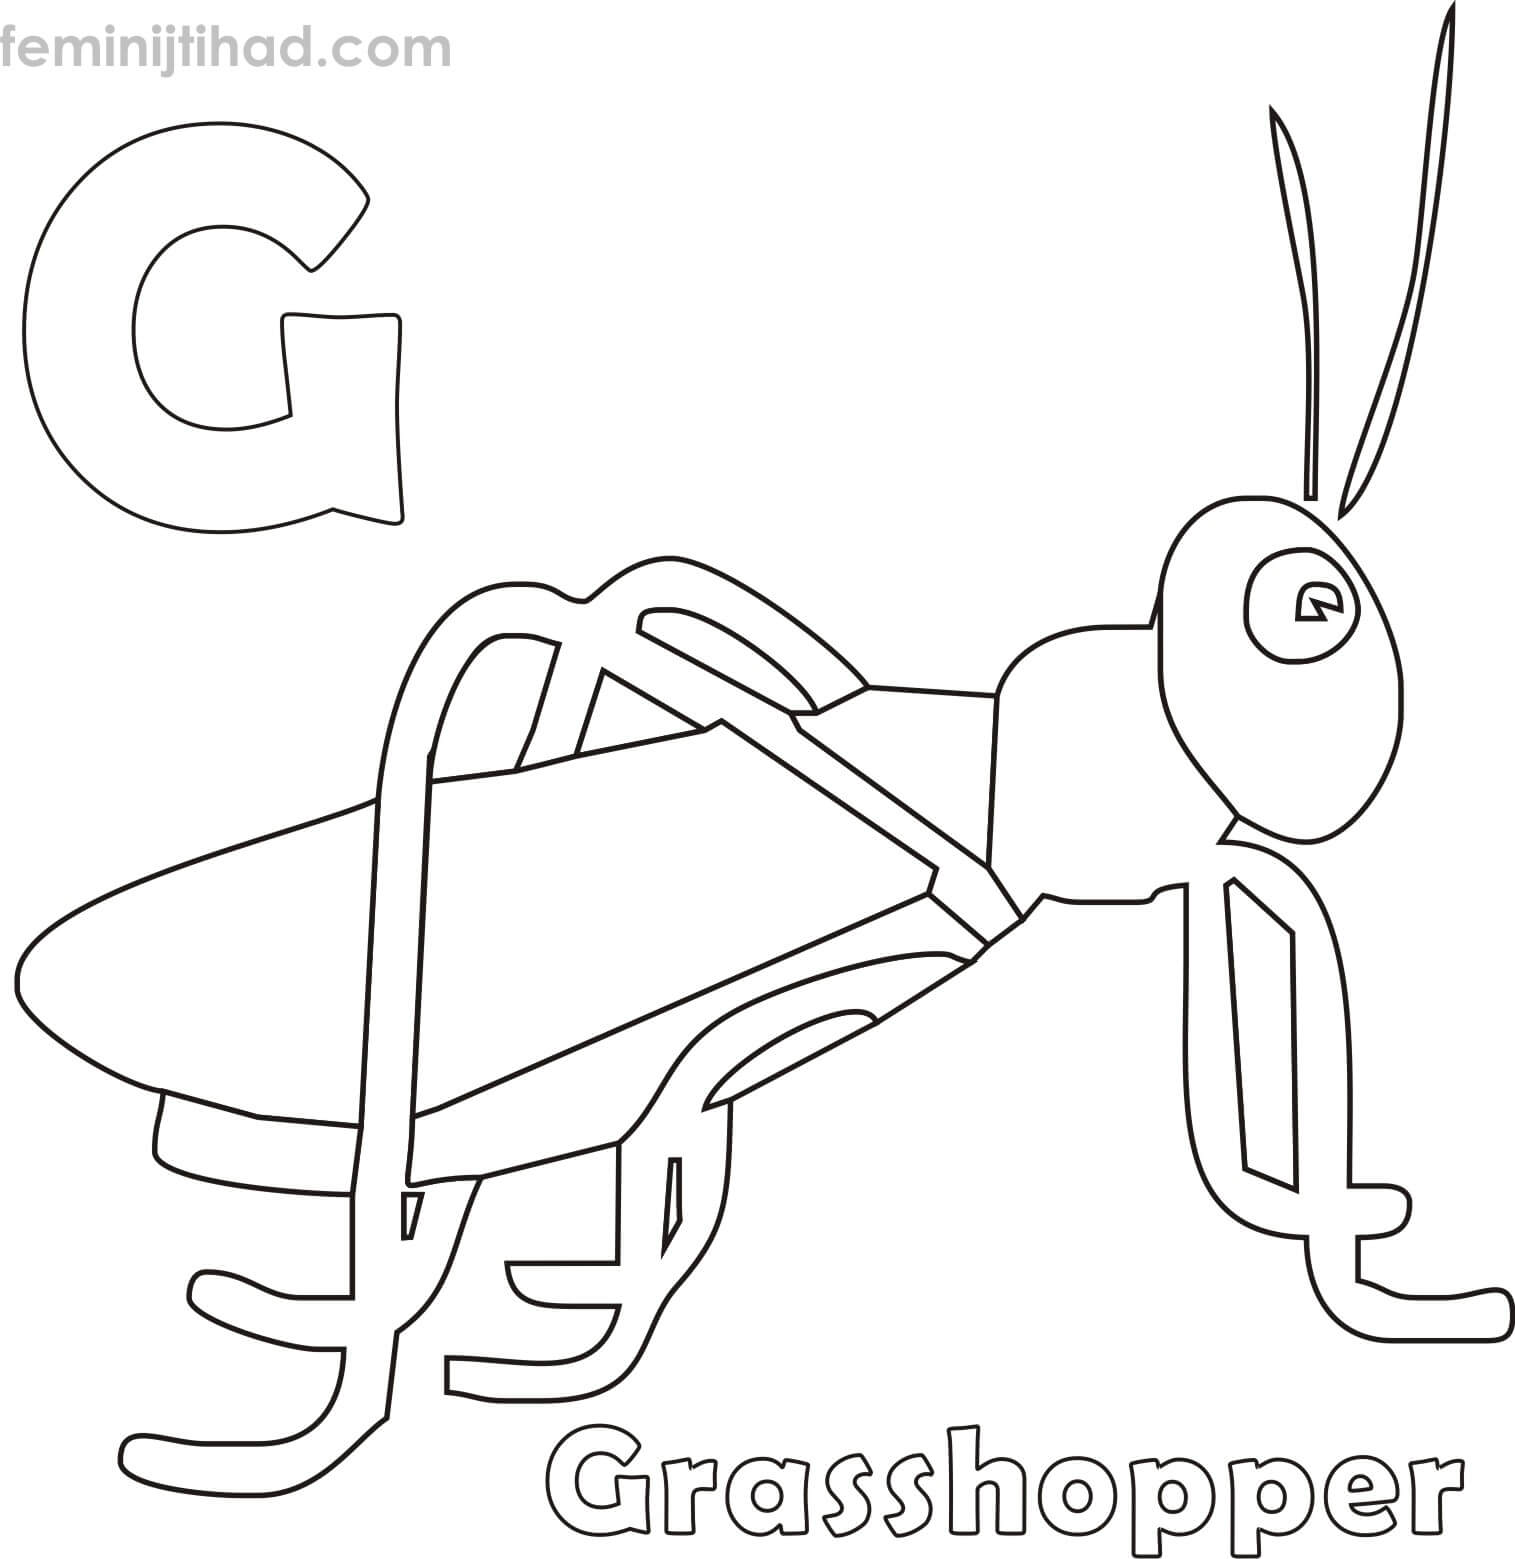 coloring page of grasshopper